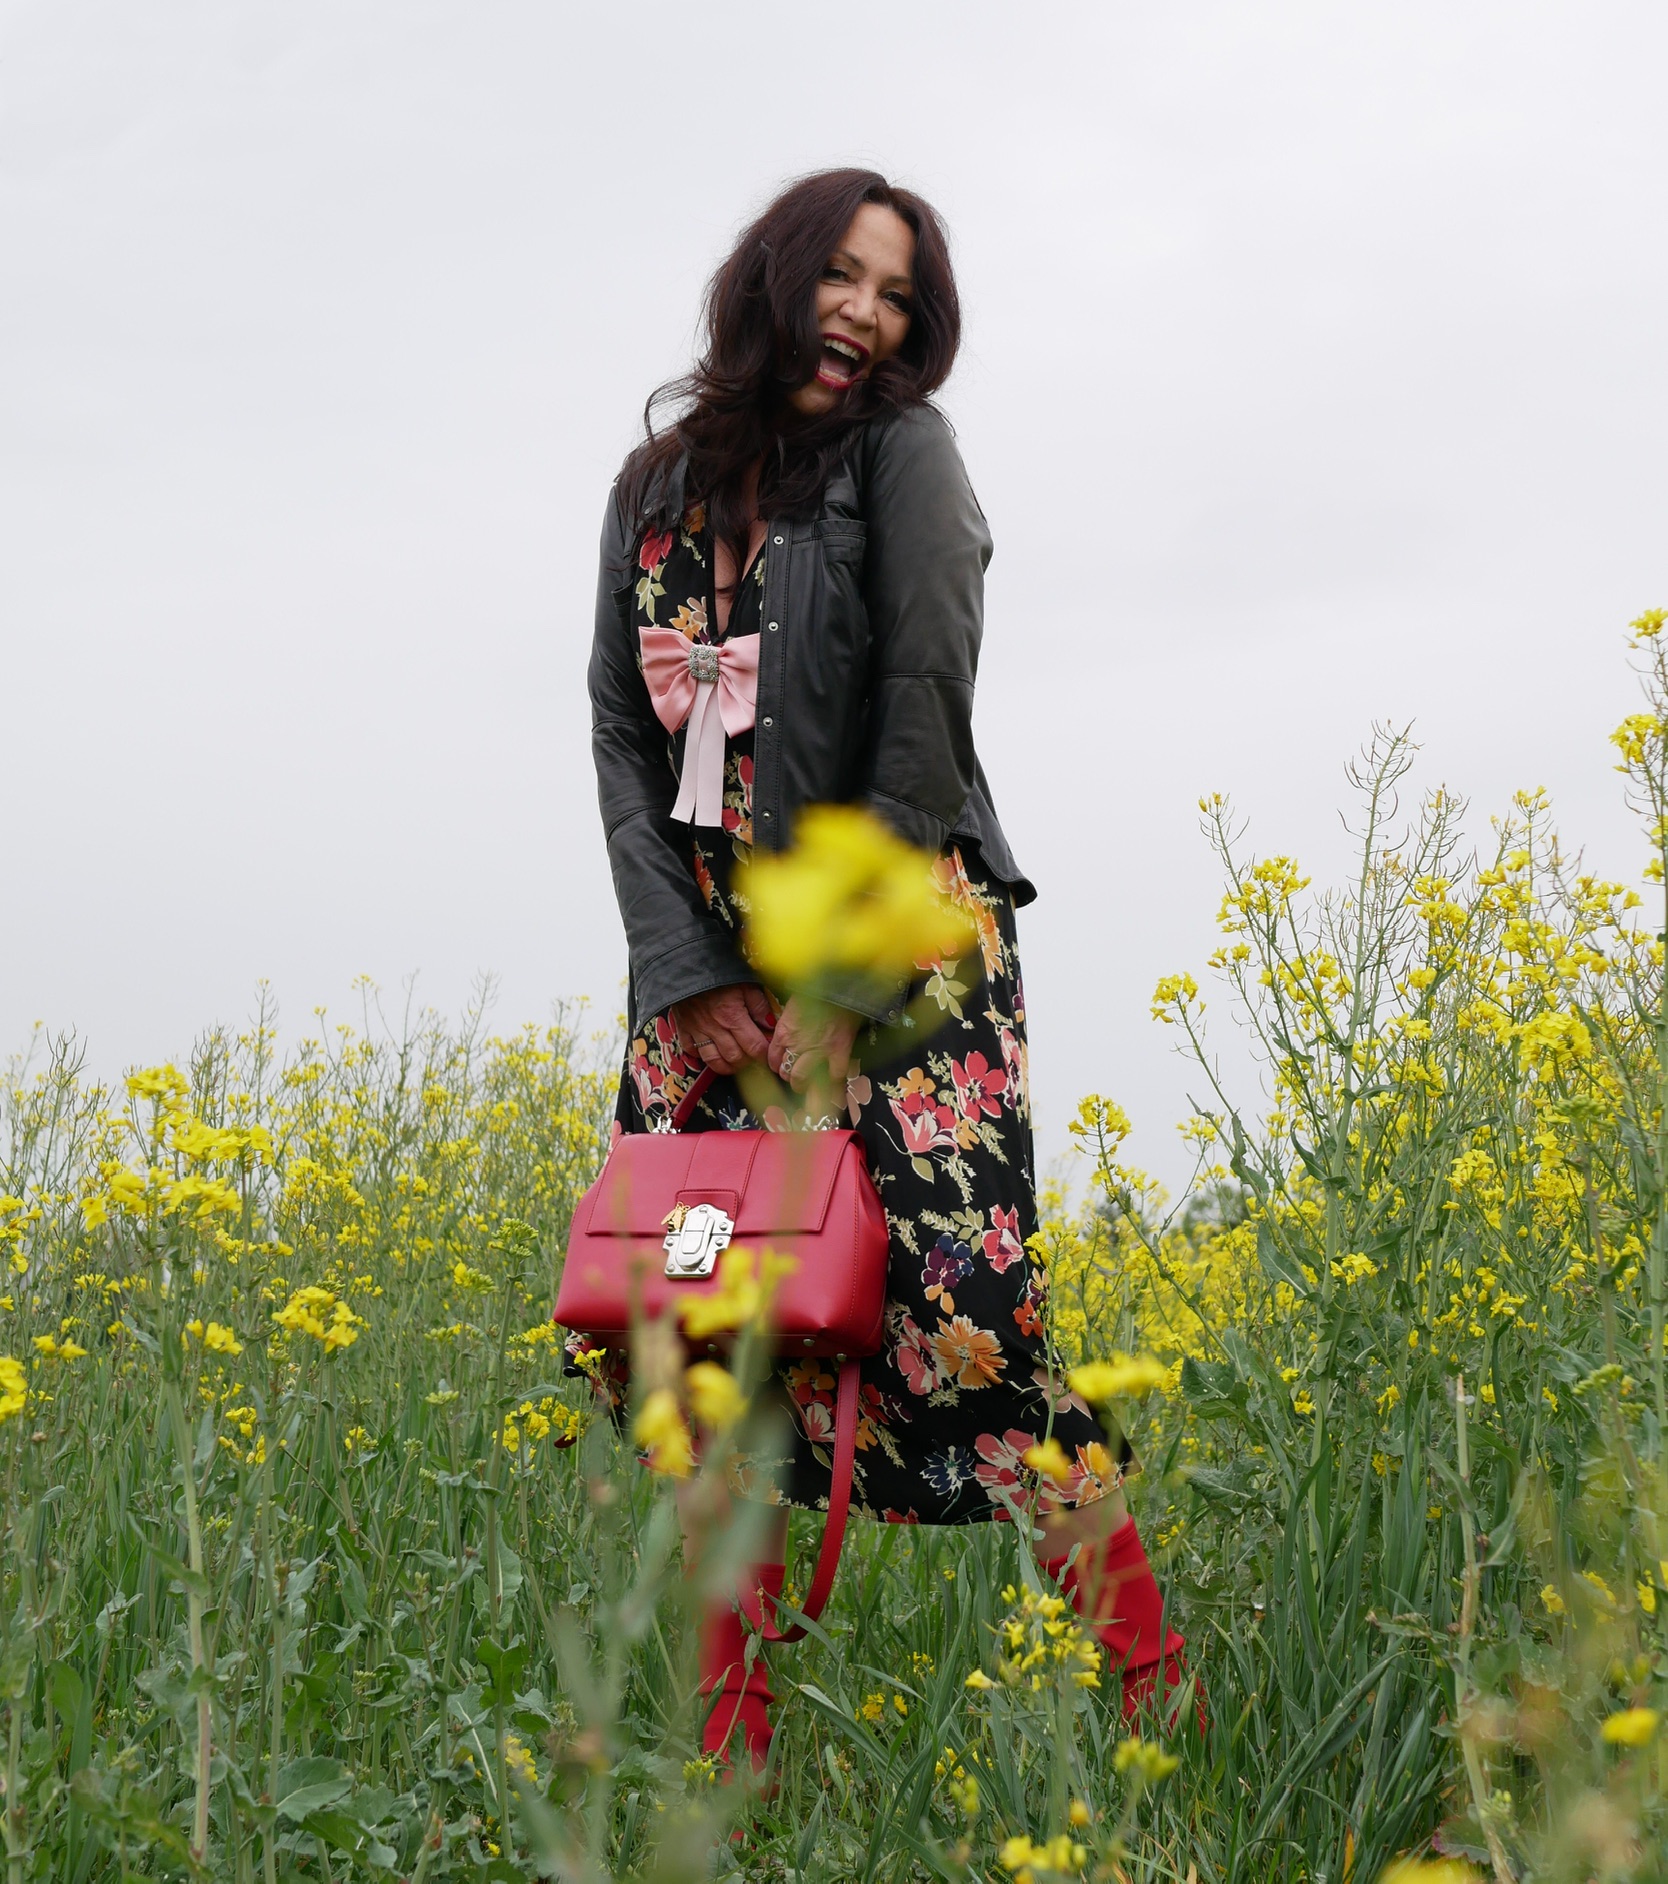 Zara flower dress, Dolce & Gabbana bag, Kenneth Cole leather jacket, red boots, Stephen Good, Elena Bender bow, italiana fashion, style for ladies, streetwear, streetfashion, streetstyle, bestage, over50, modeblogger50+, Fashionblog Augsburg, Fashionblogger, Jewelryblogger, Accessoires